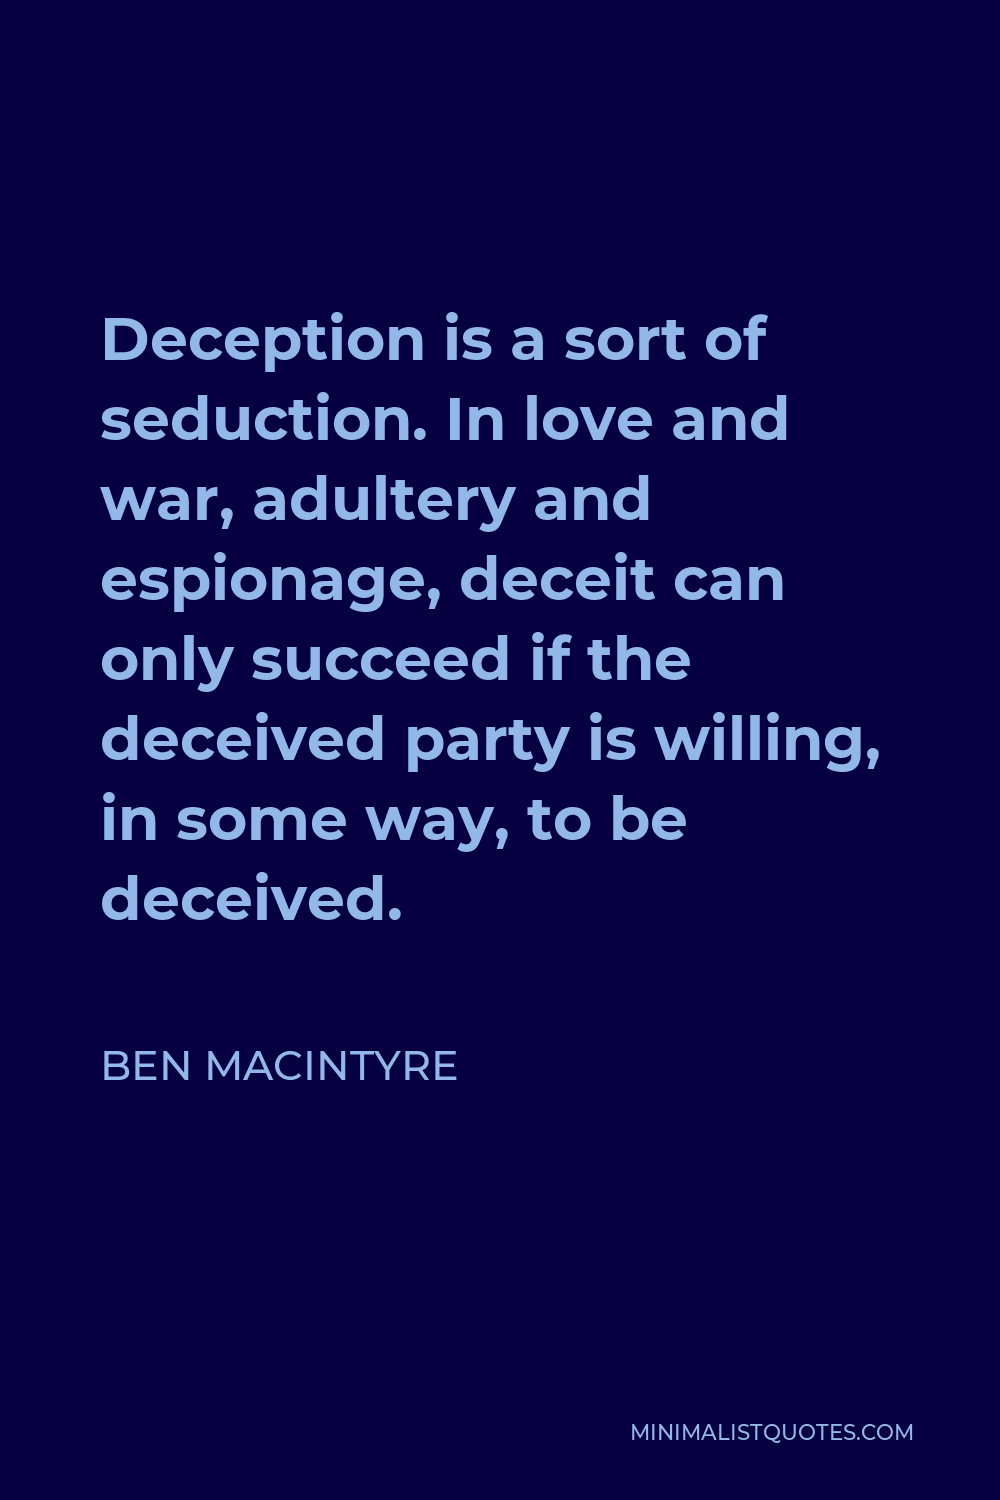 Ben Macintyre Quote - Deception is a sort of seduction. In love and war, adultery and espionage, deceit can only succeed if the deceived party is willing, in some way, to be deceived.